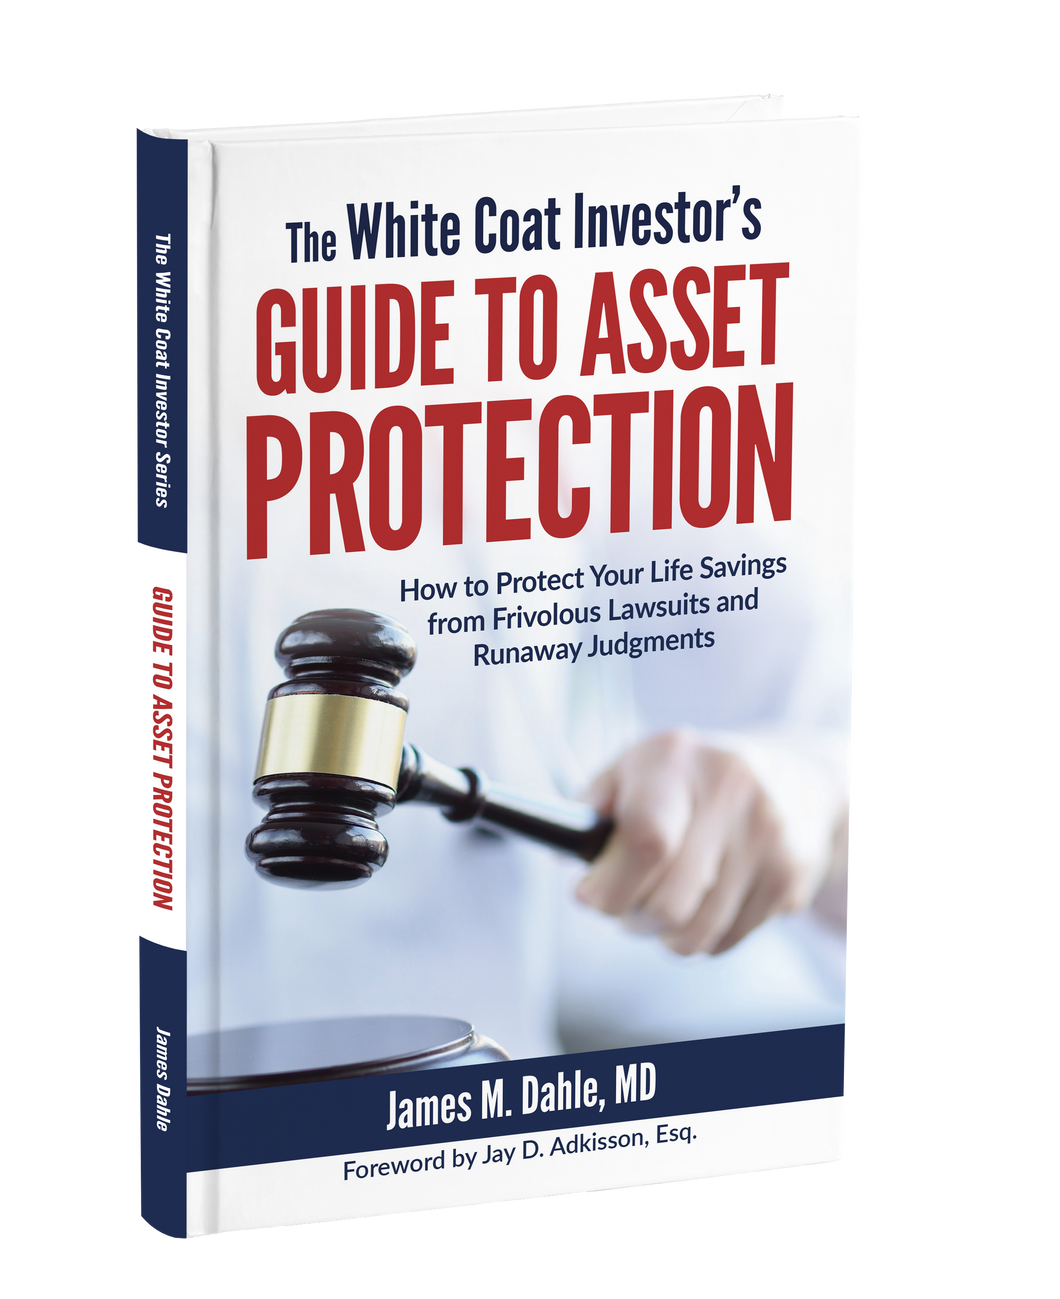 Book: Guide To Asset Protection